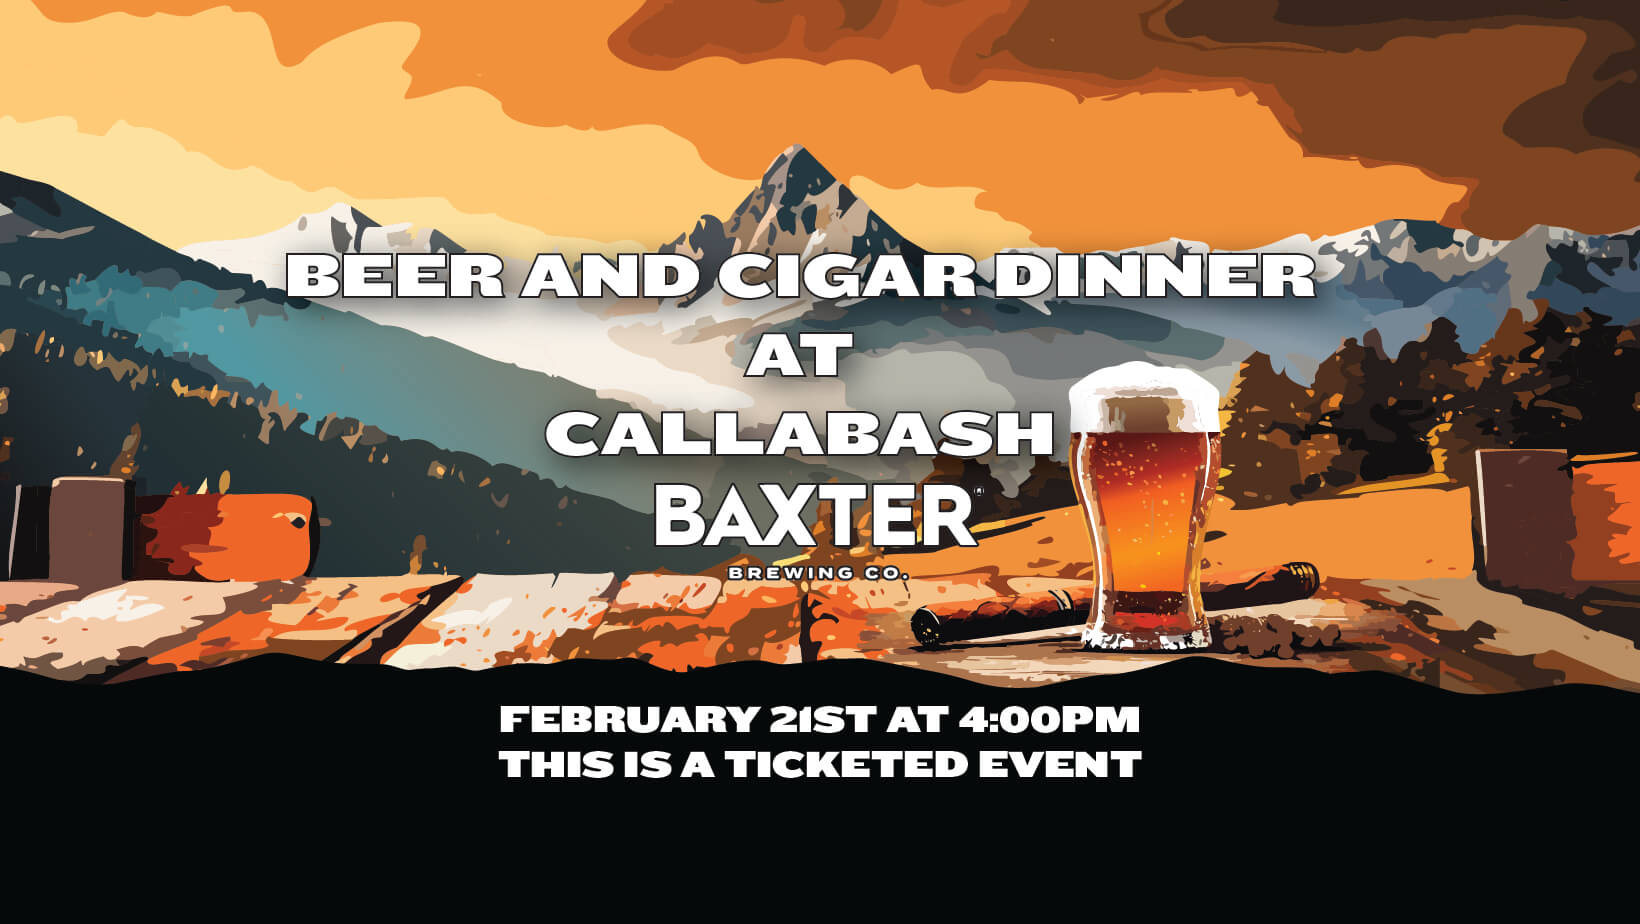 Image promoting a beer and cigar dinner at Callabash Cafe on February 21st.